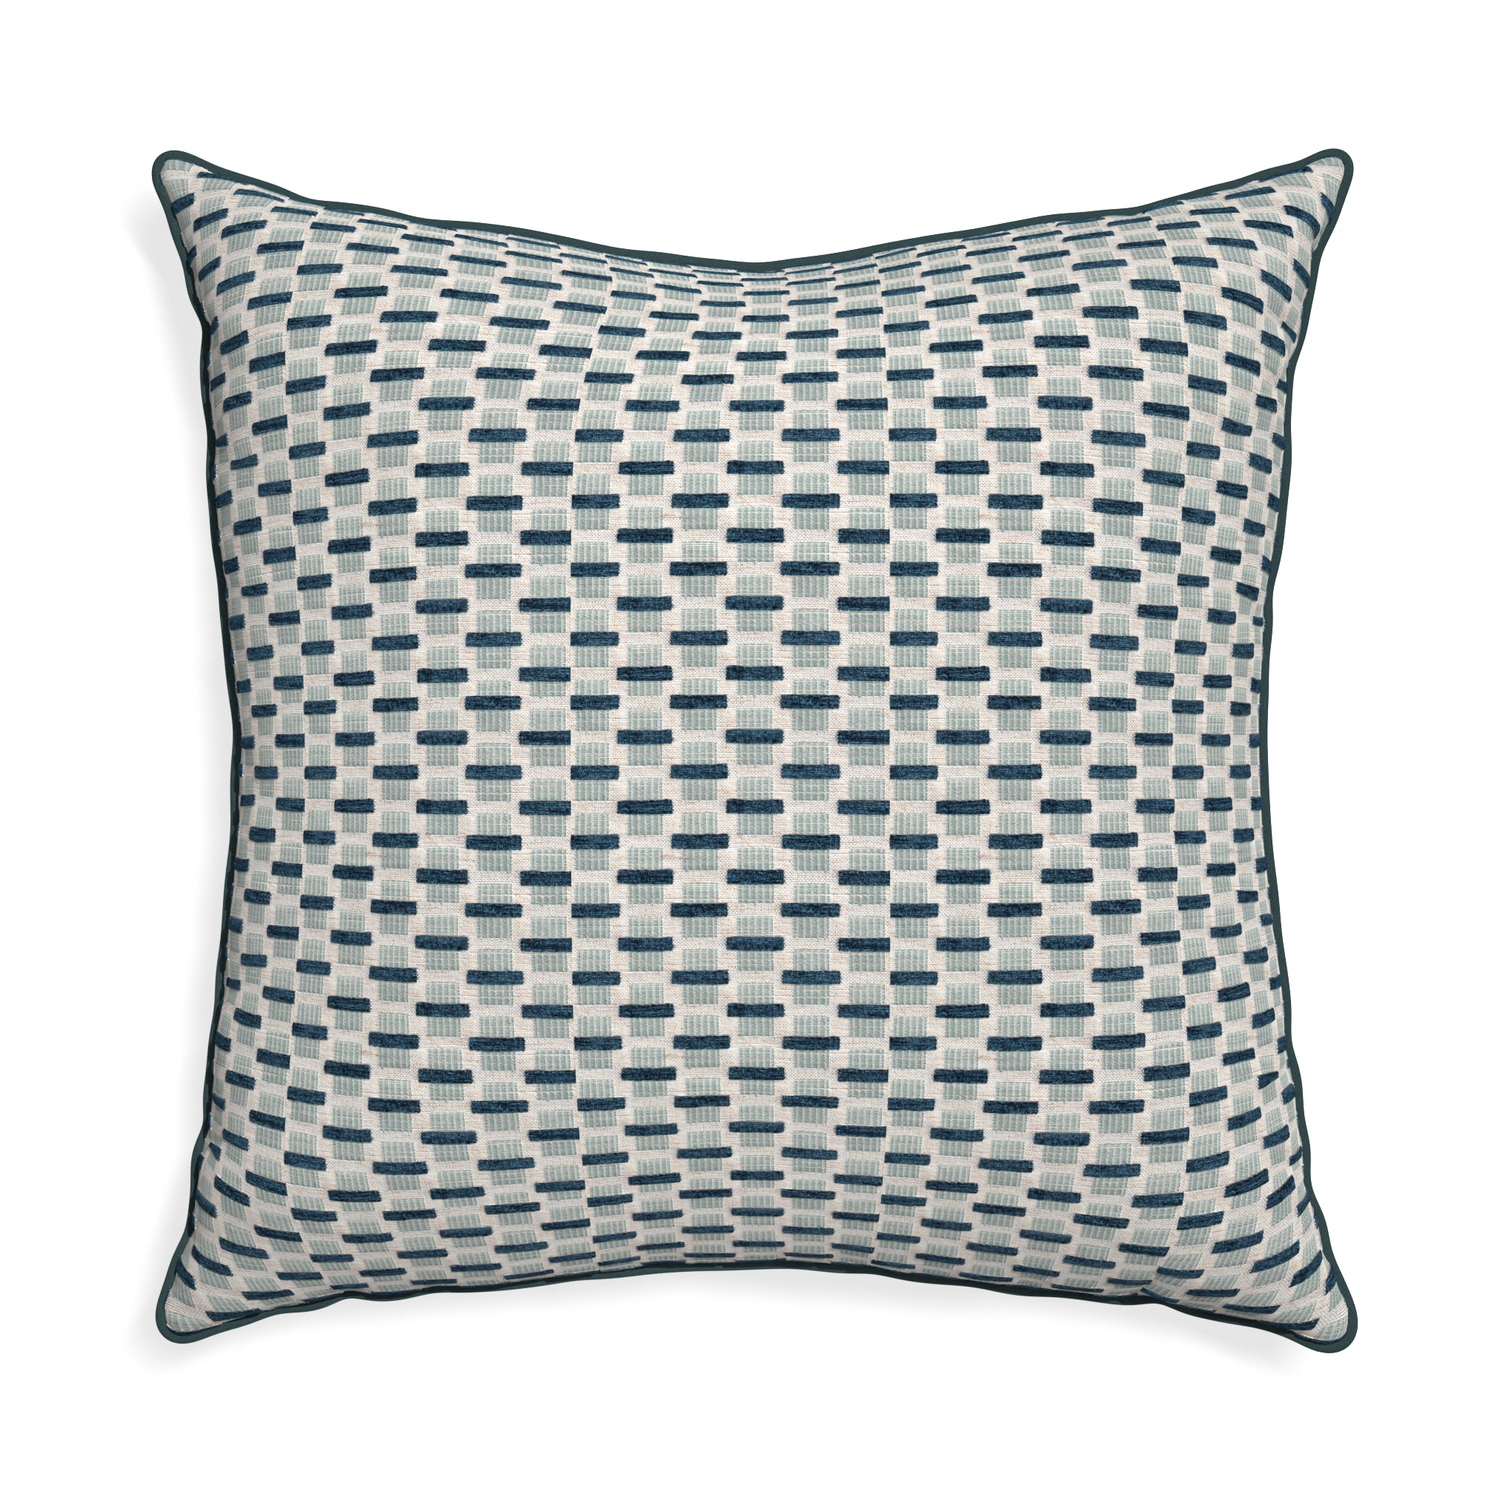 Euro-sham willow amalfi custom blue geometric chenillepillow with p piping on white background